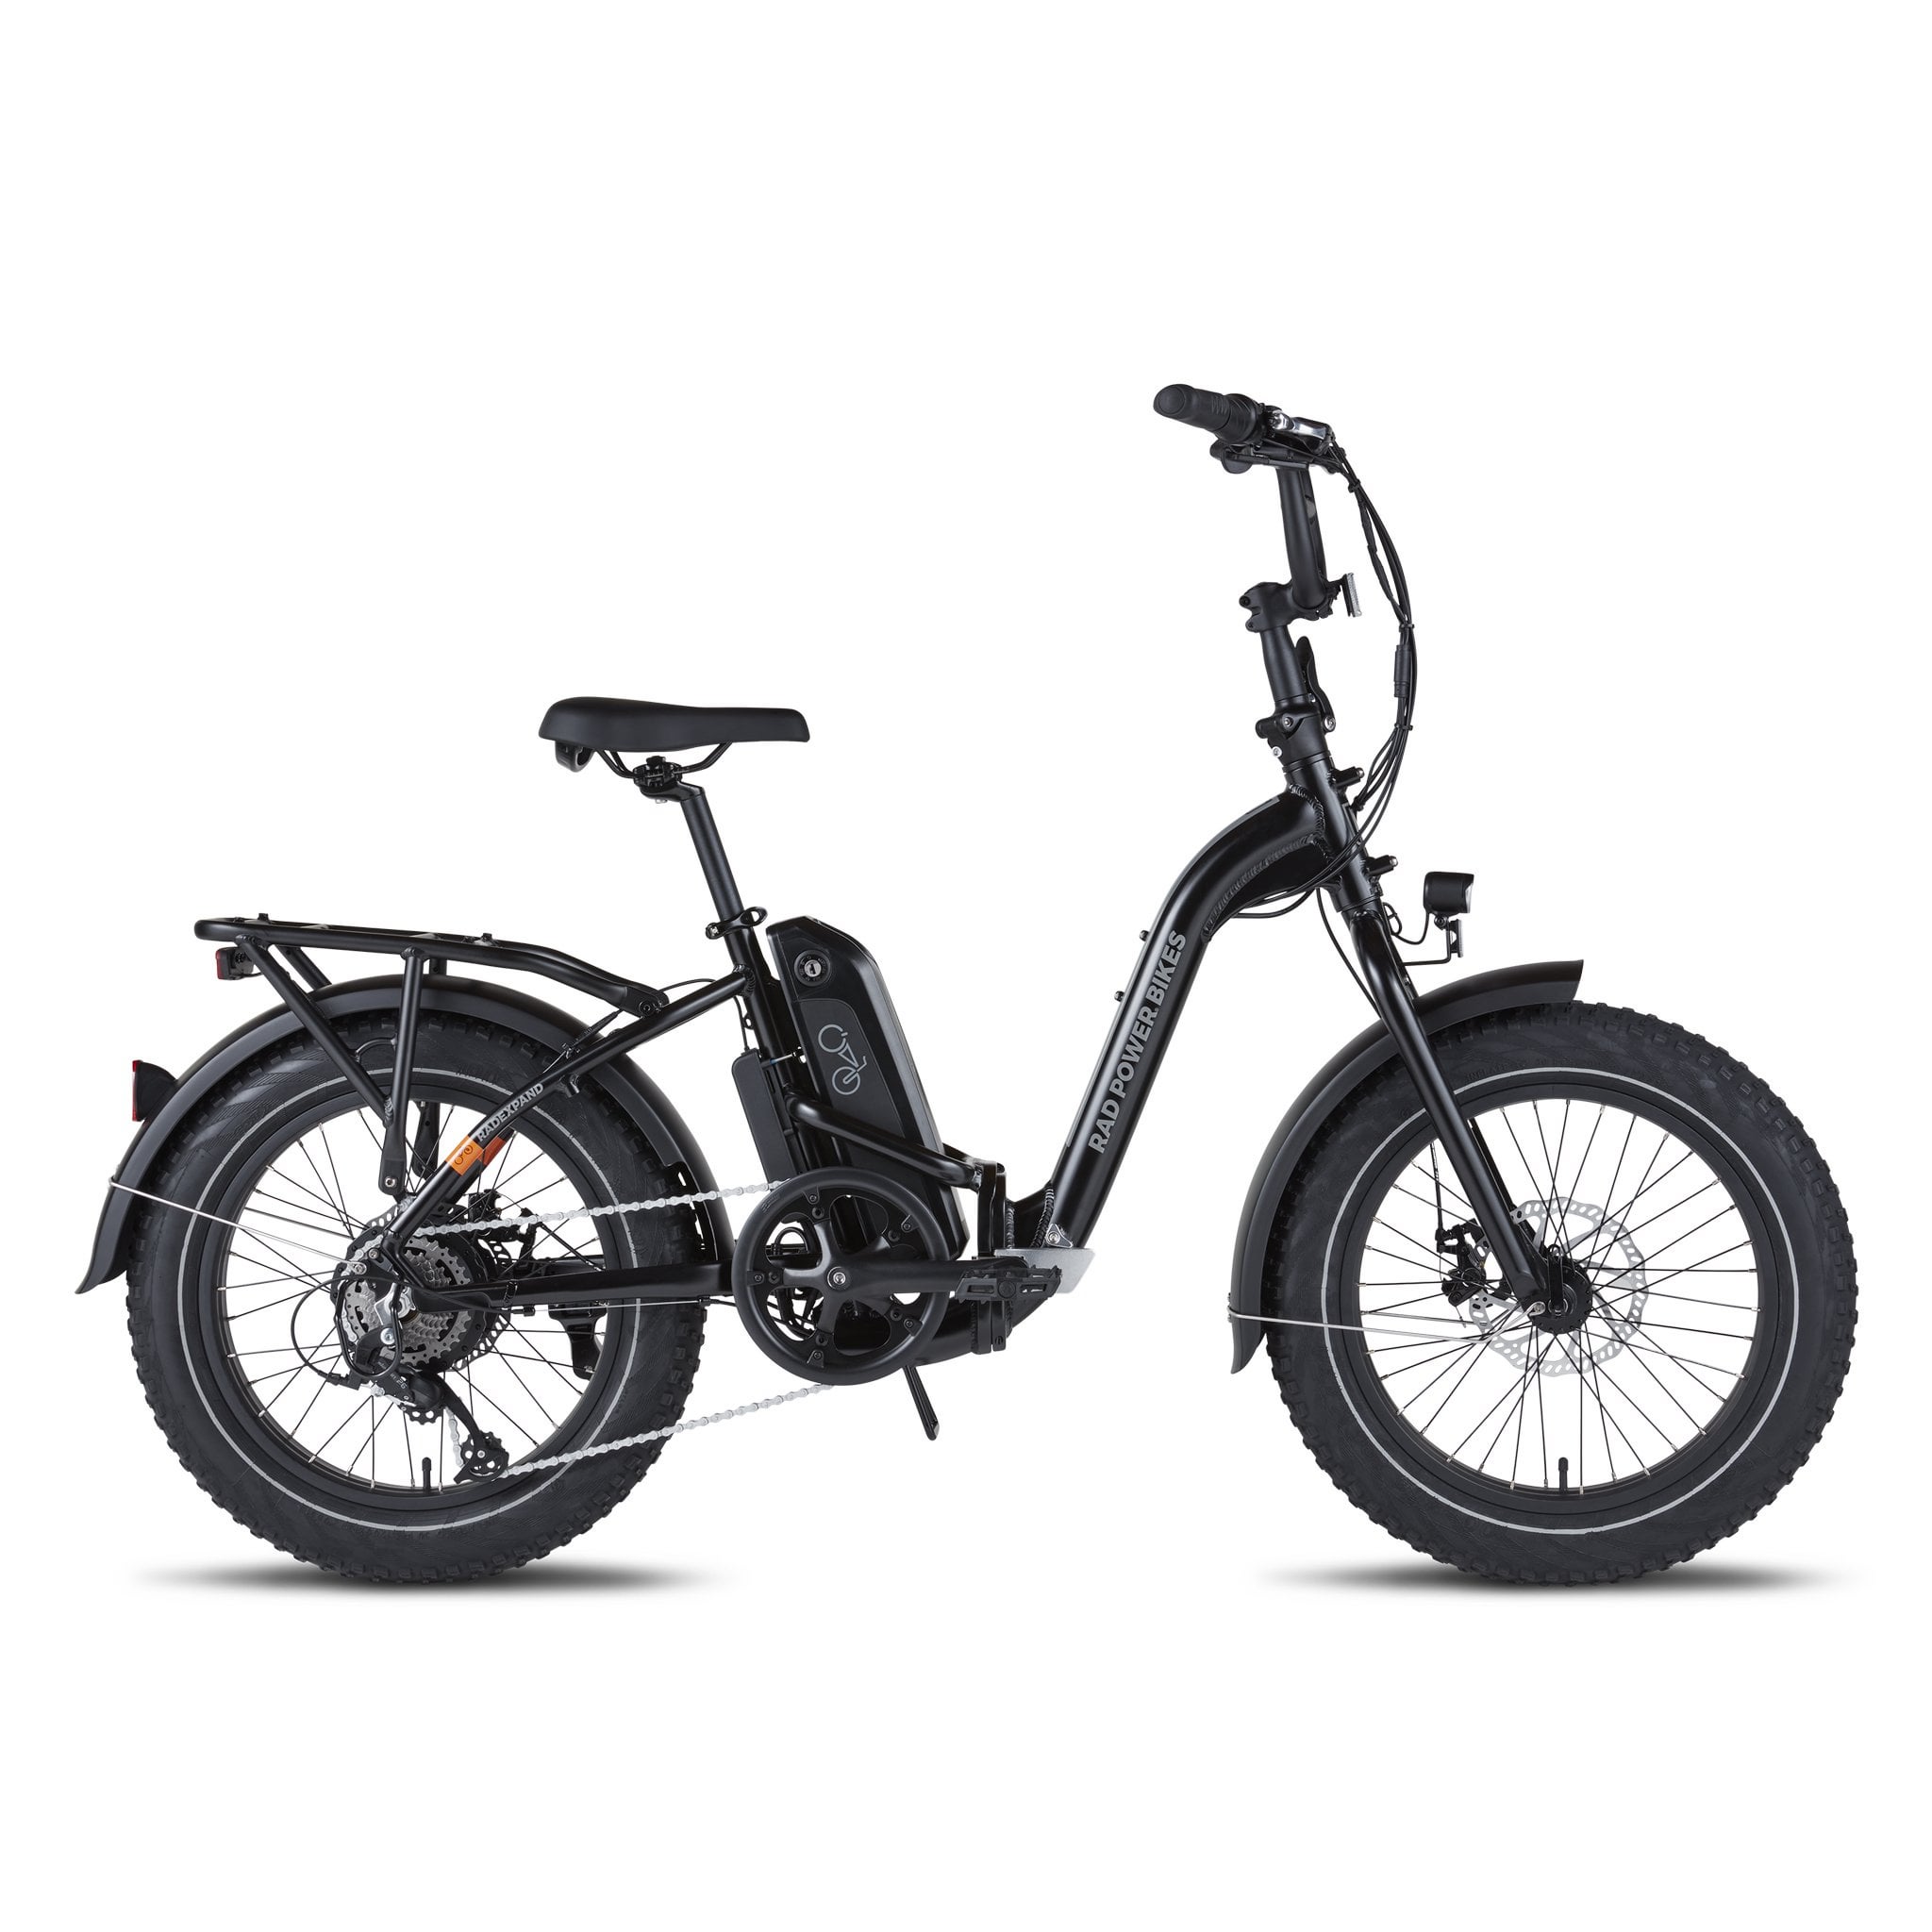 Looking for ebike recommendations and tips